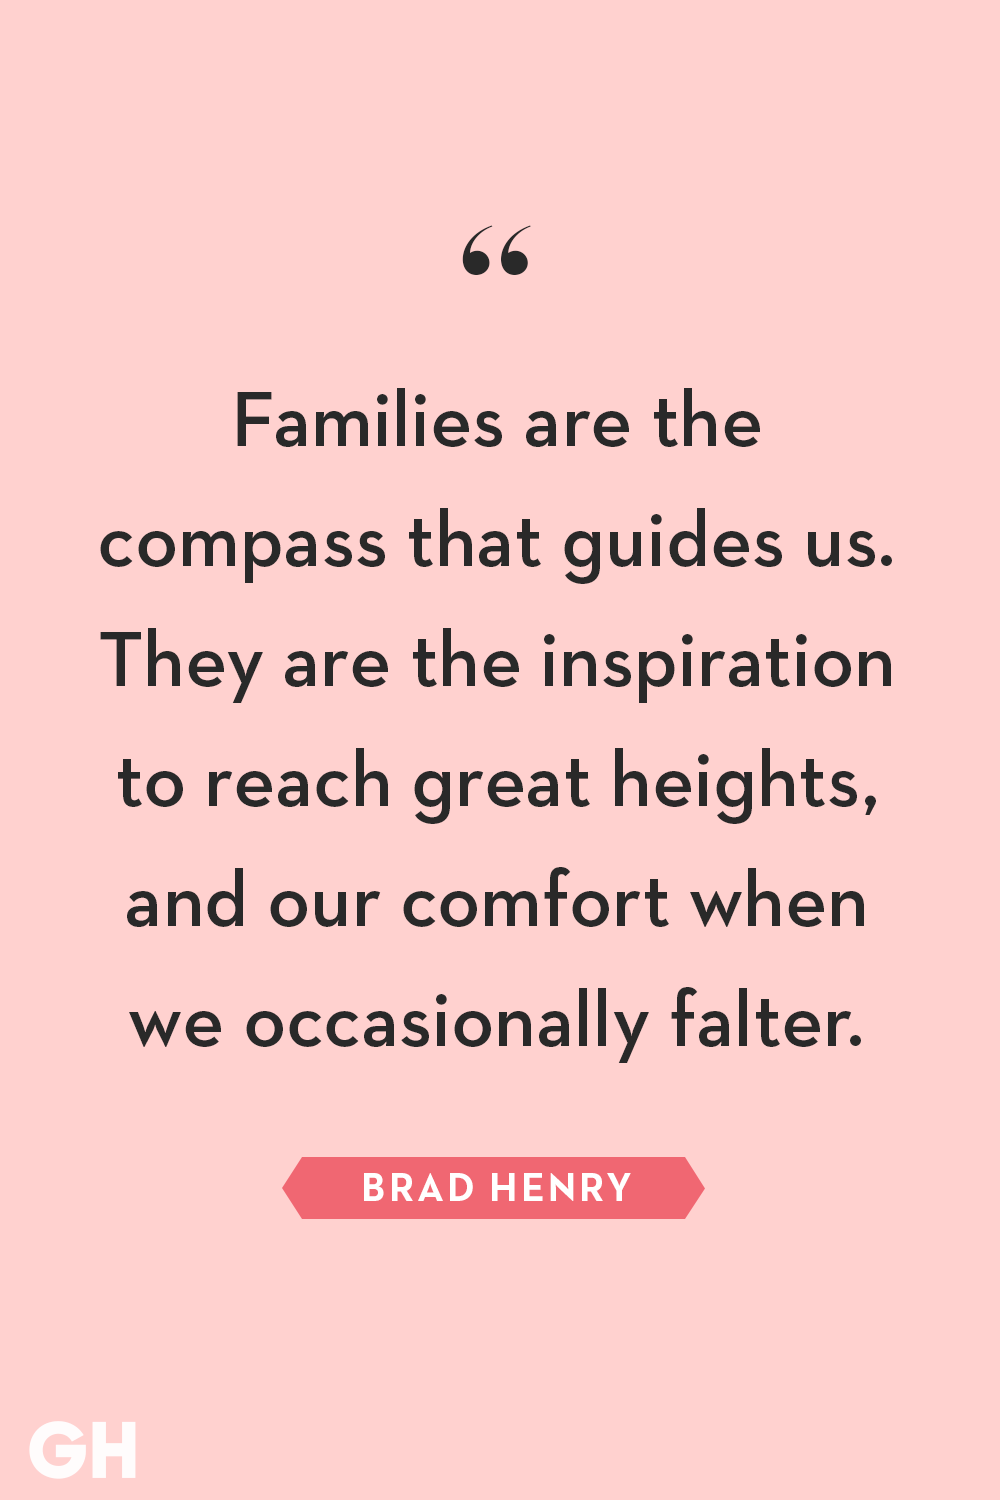 families are the compass that guides us. they are the inspiration to reach great heights, and our comfort when we occasionally falter. brad henry